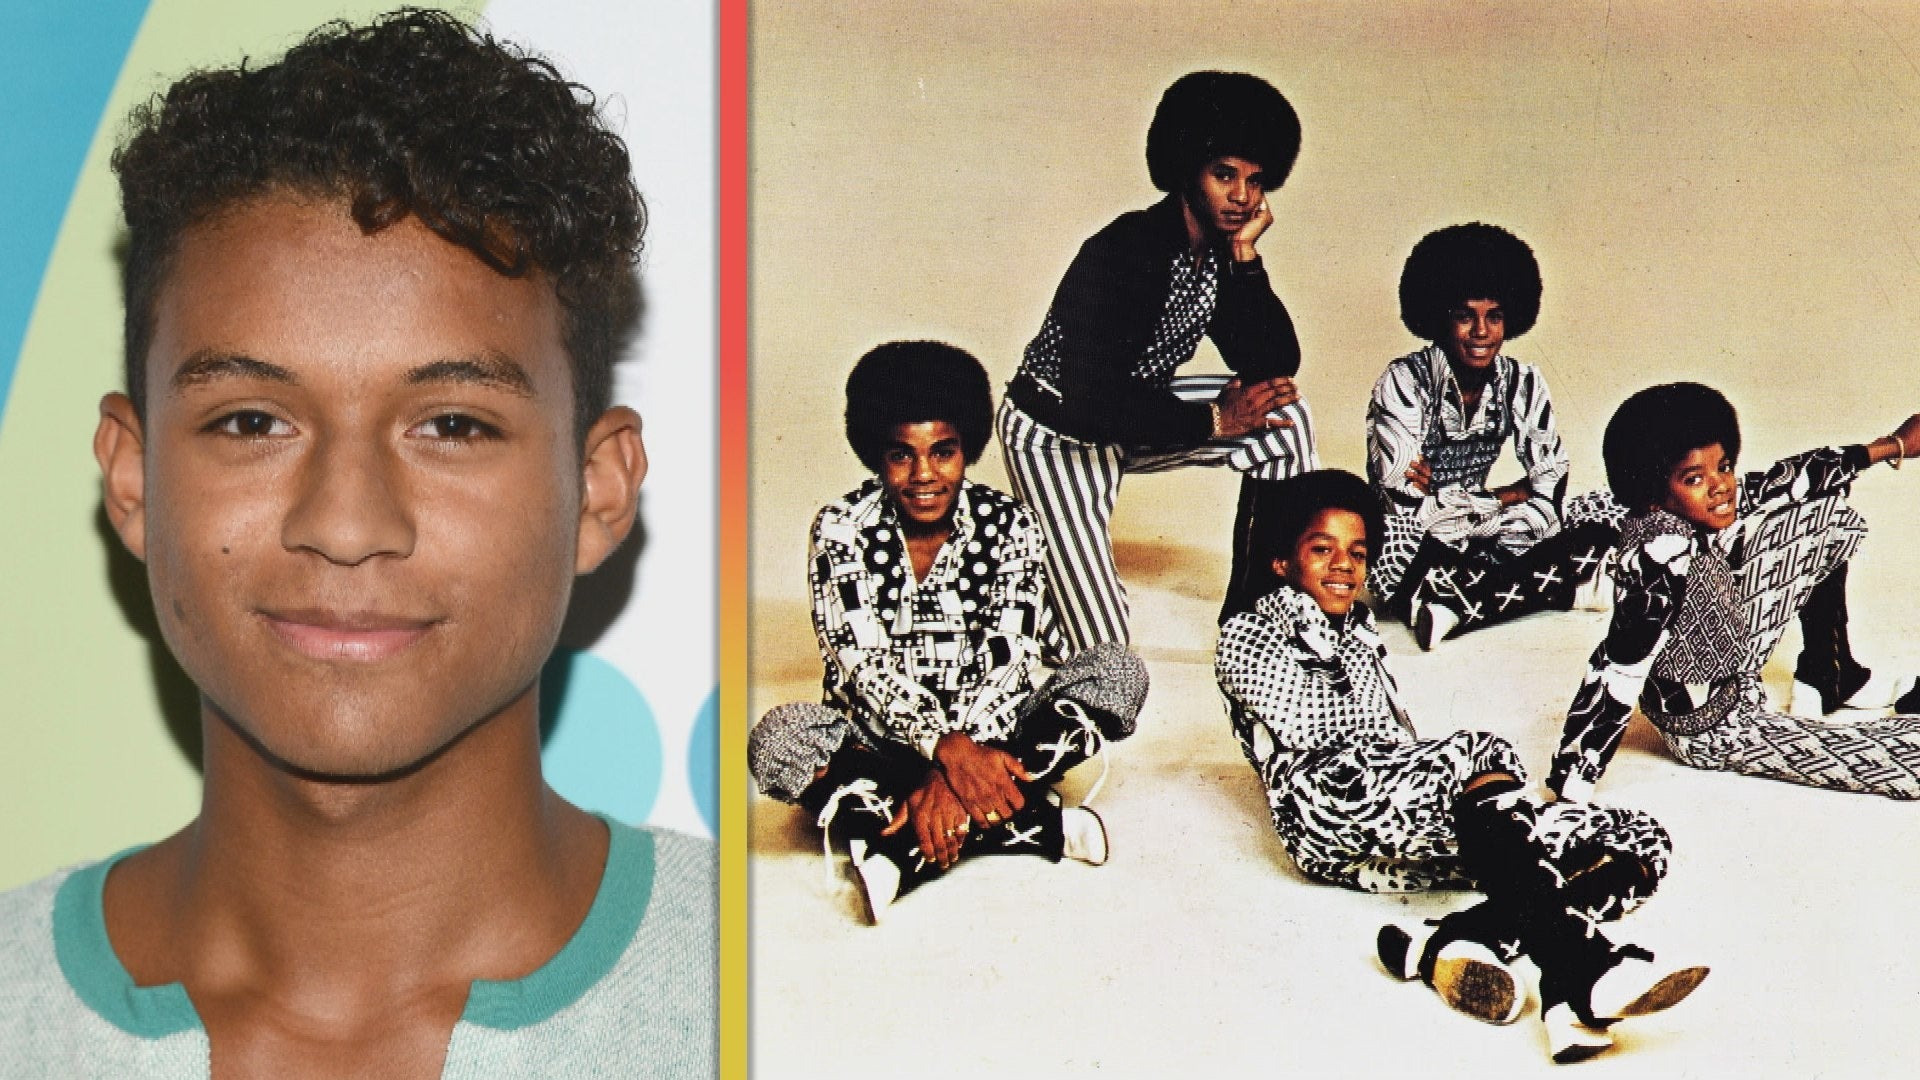 Michael Jackson Biopic: Who's Playing the Rest of the Jackson 5